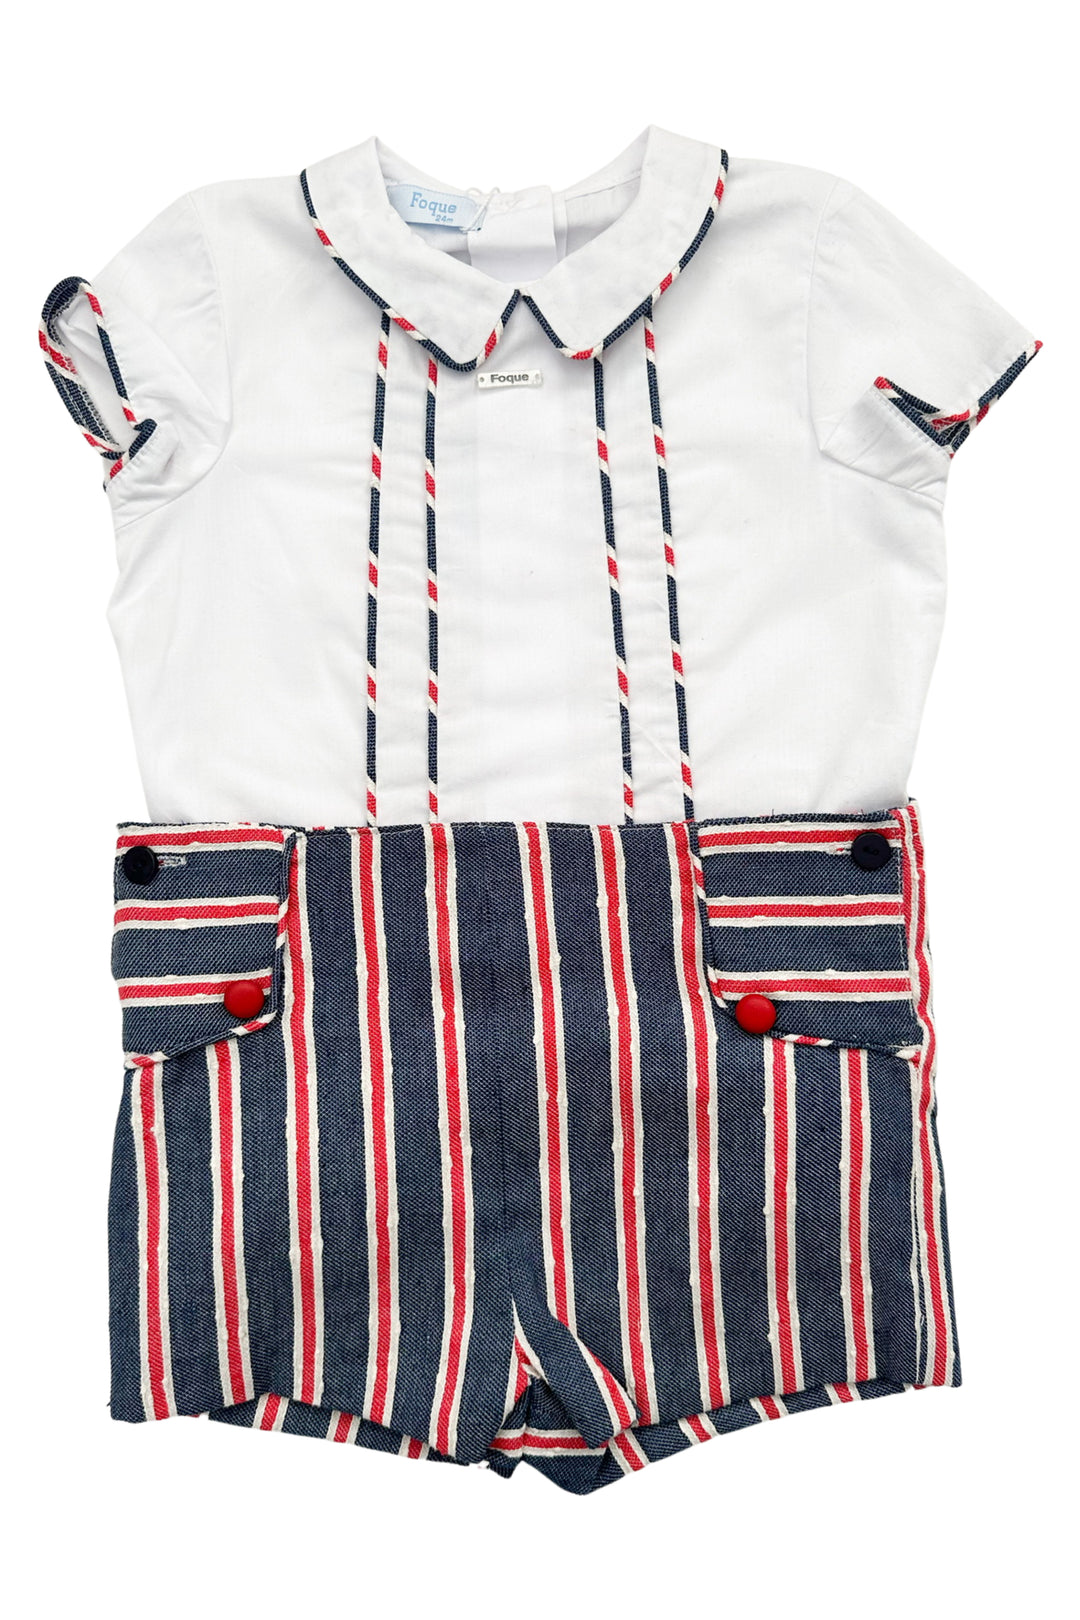 Foque PREORDER "Oliver" Navy & Red Striped Shirt & Shorts | Millie and John